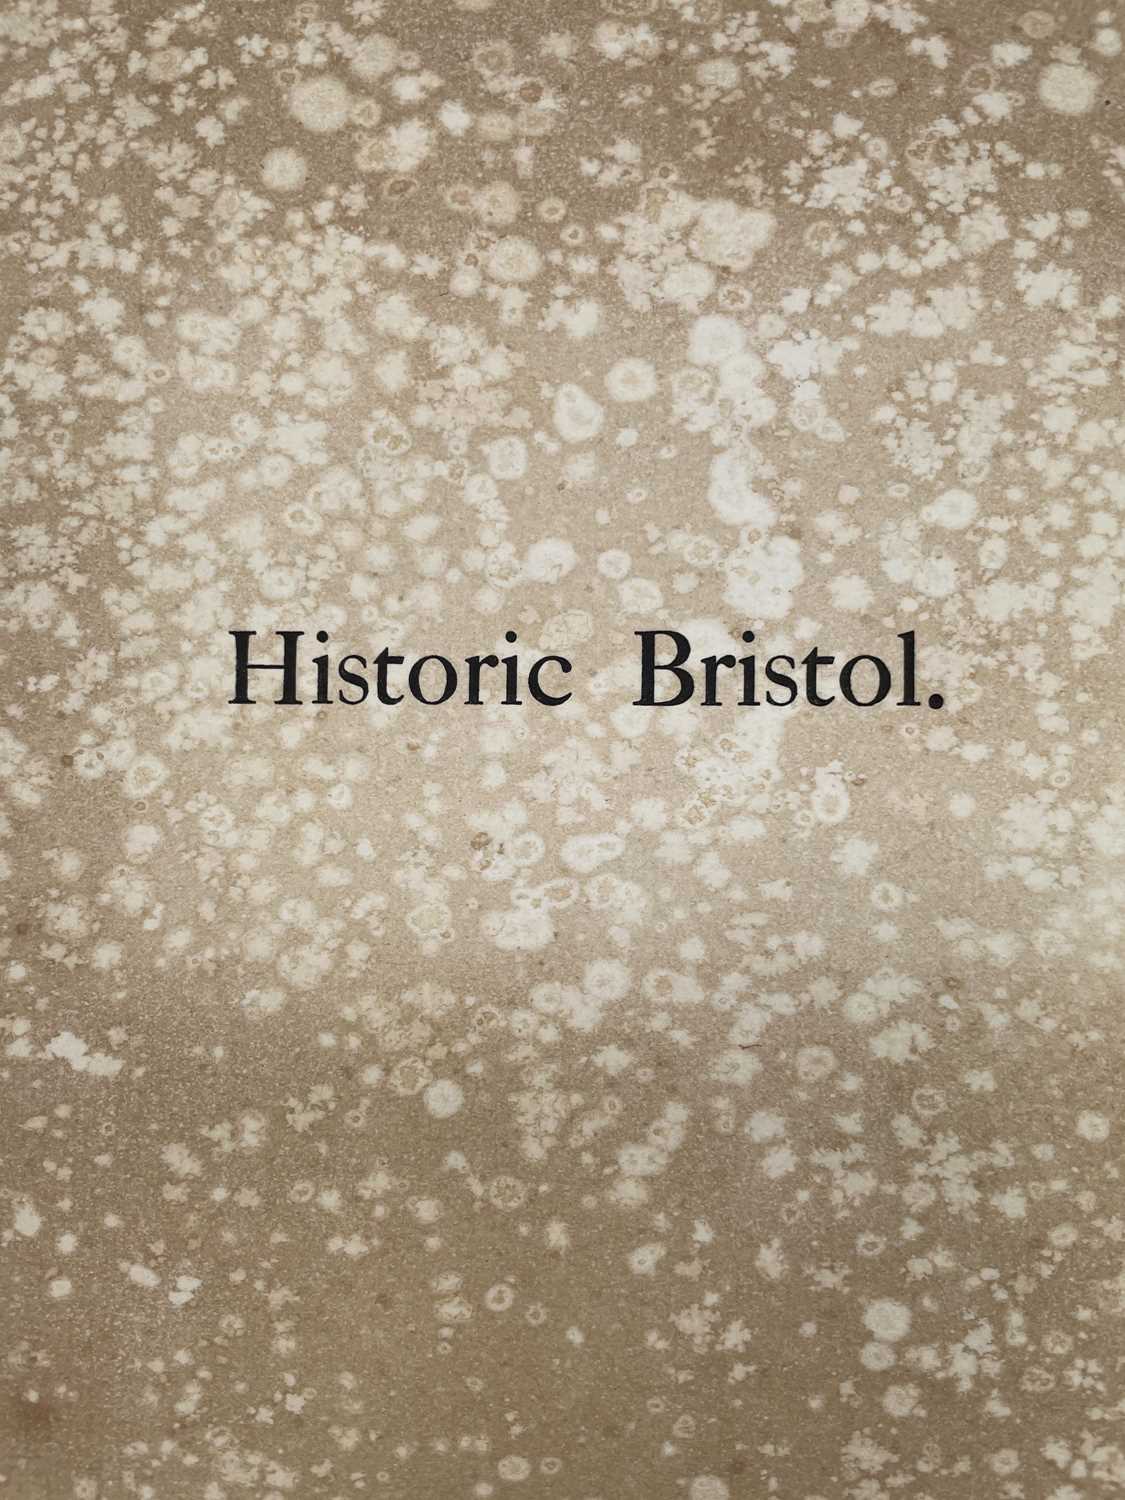 CHARLES BIRD illustrations. 'Historic Bristol,' No 64/104, six original etchings signed by artist, - Image 11 of 11